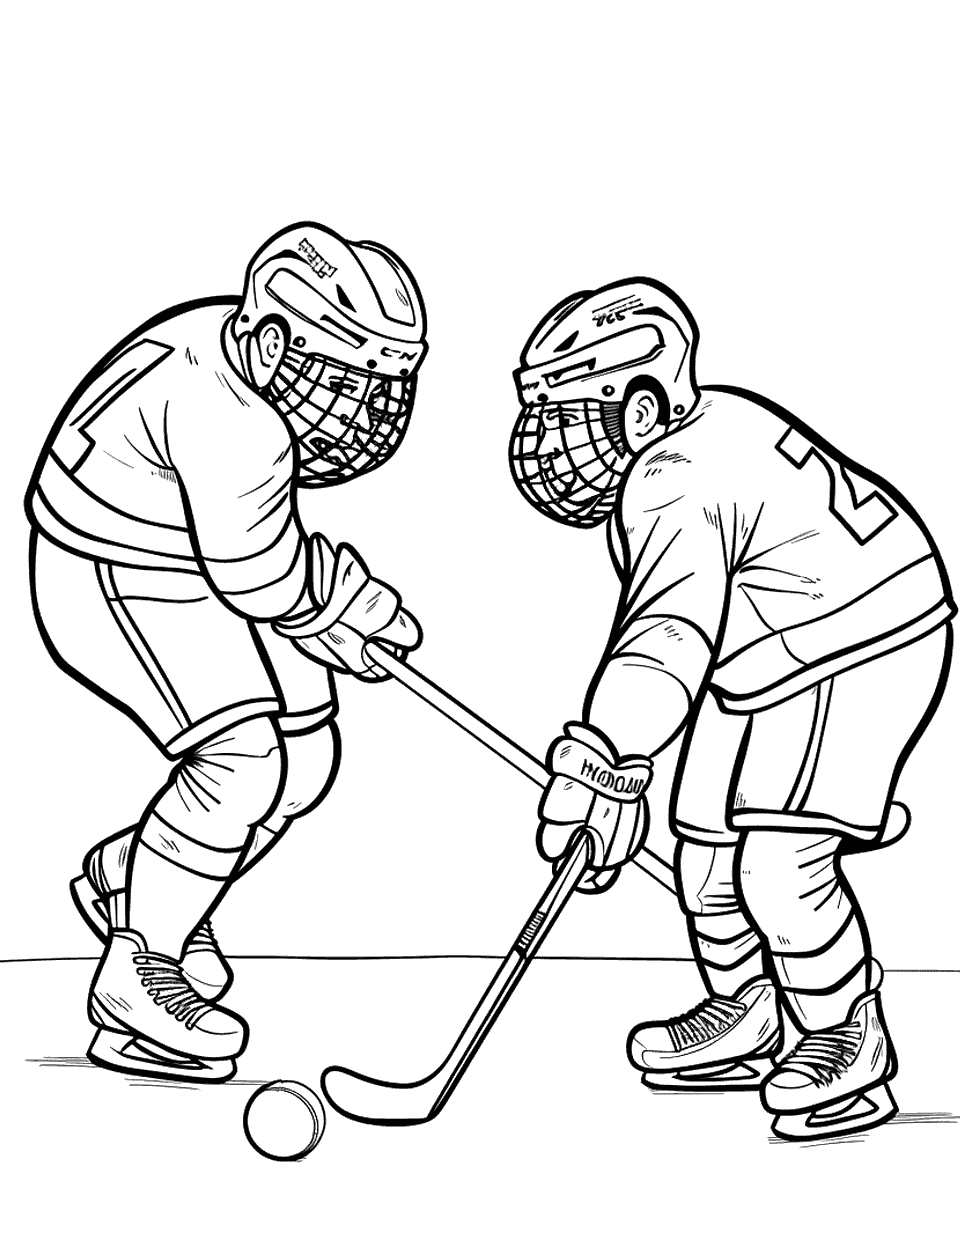 Hockey Face-Off Sports Coloring Page - Two hockey players facing off at the the game, with the puck between them.